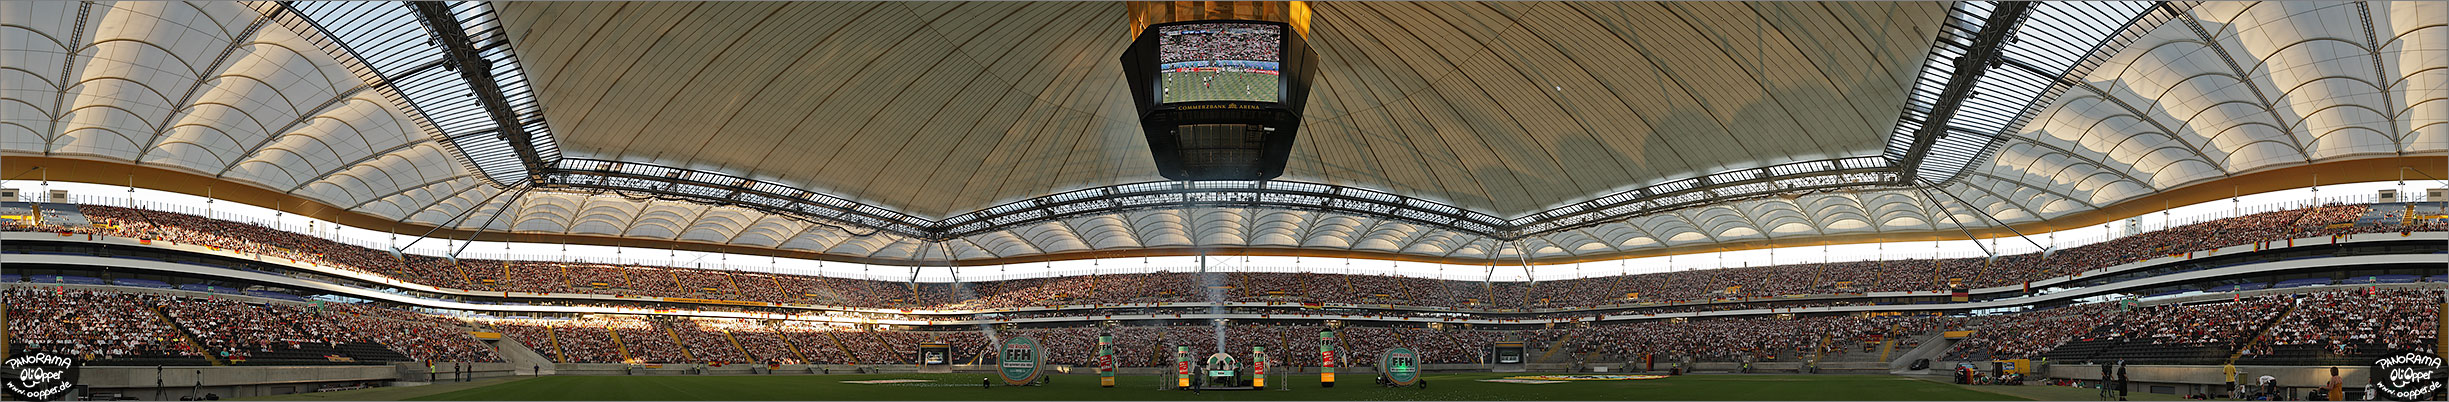 Panorama Frankfurt - Commerzbank Arena - p288 - (c) by Oliver Opper